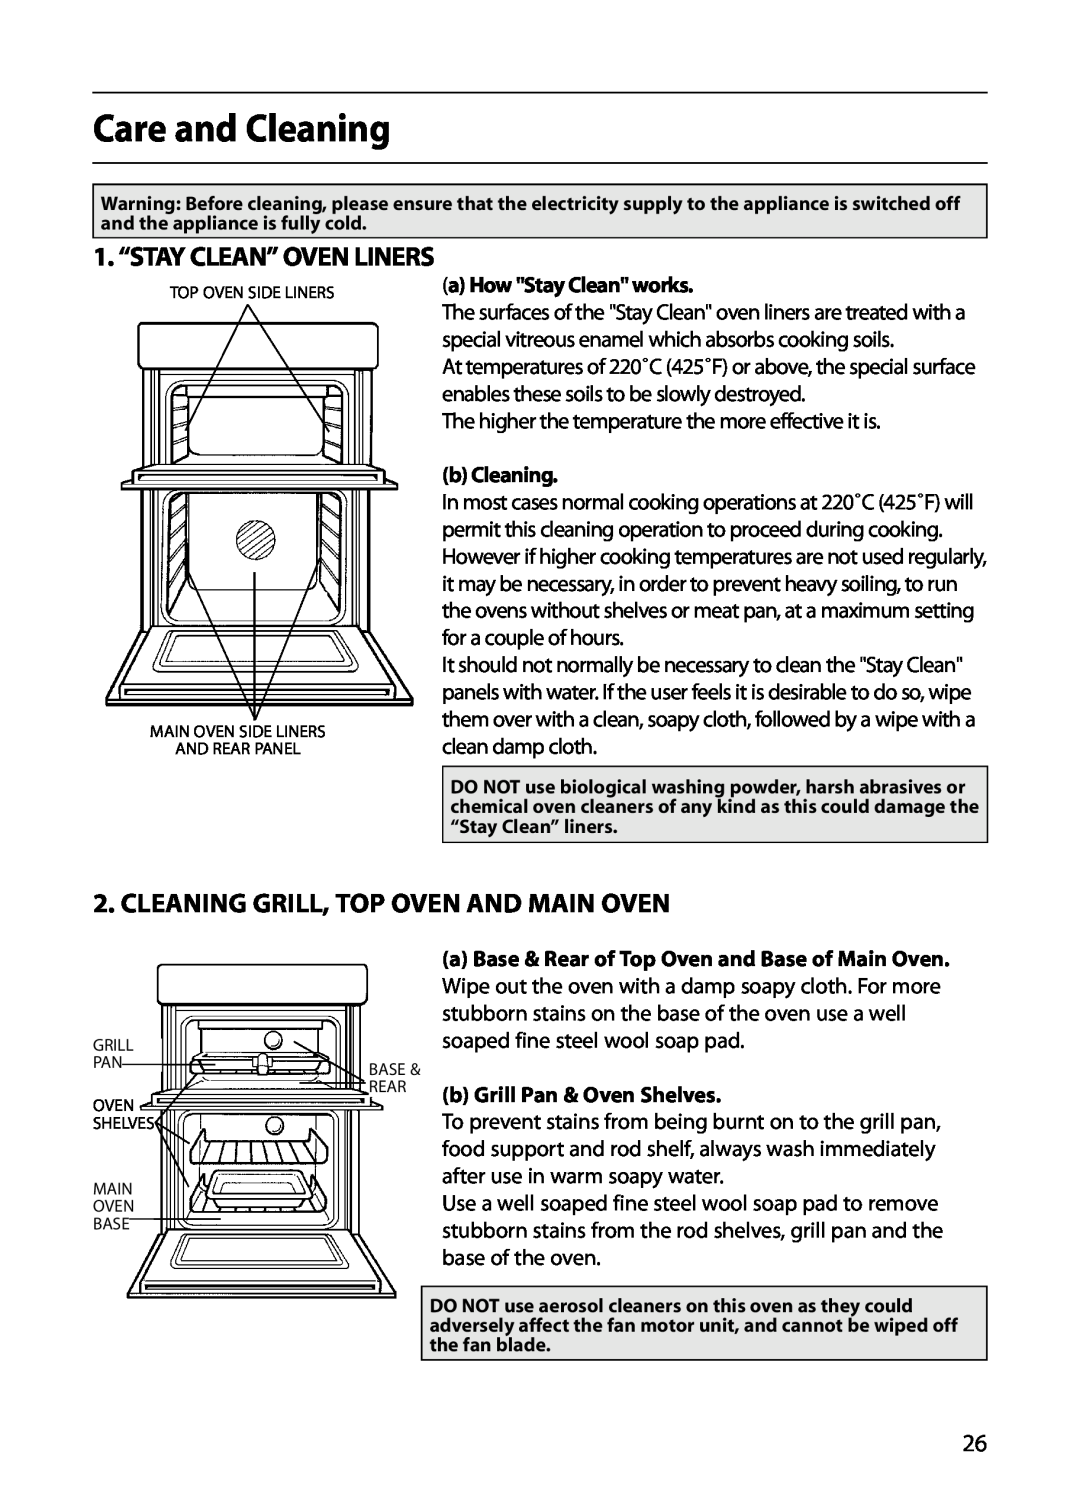 Hotpoint S130E manual Care and Cleaning, Cleaning Grill, Top Oven And Main Oven, 1. “STAY CLEAN” OVEN LINERS, b Cleaning 